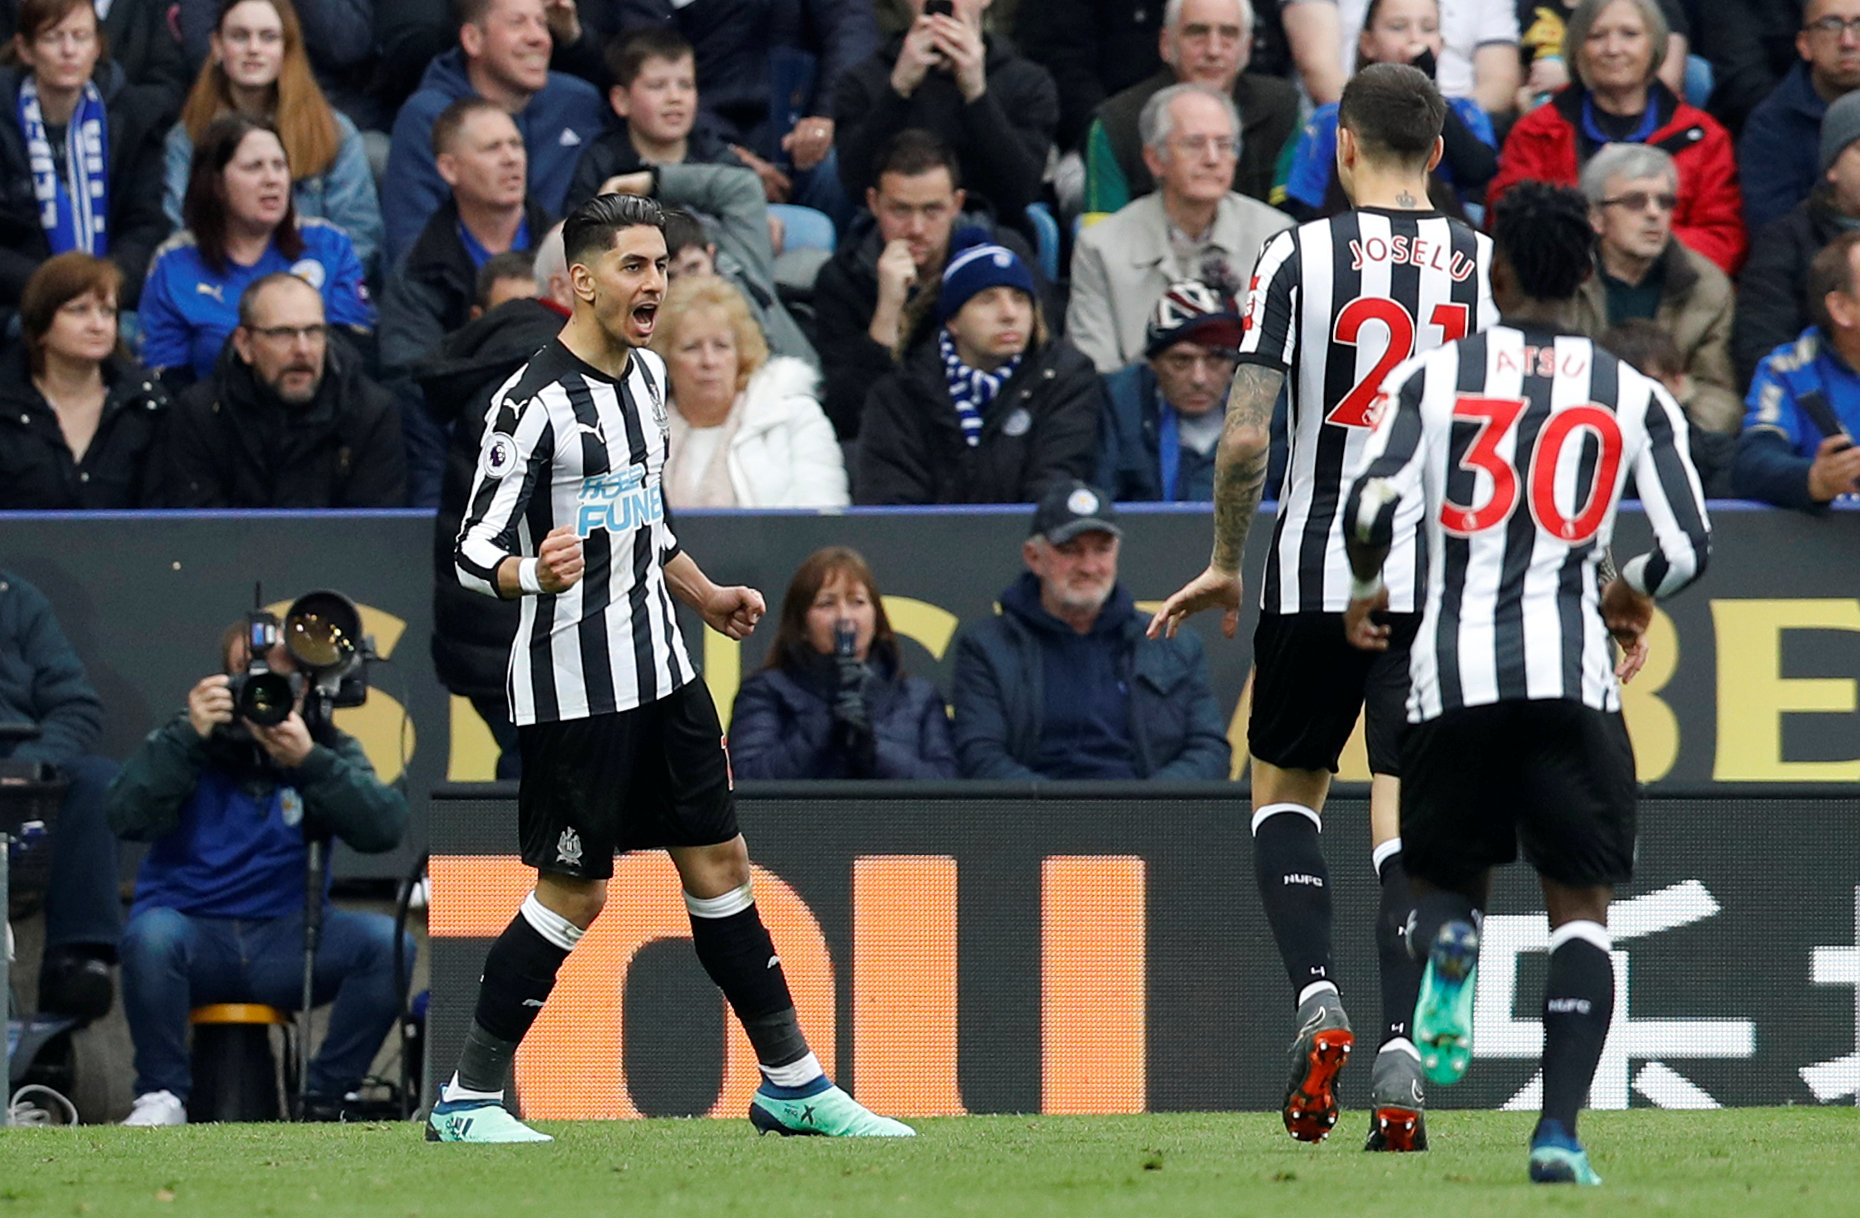 Football: Newcastle step closer to survival with win over Leicester